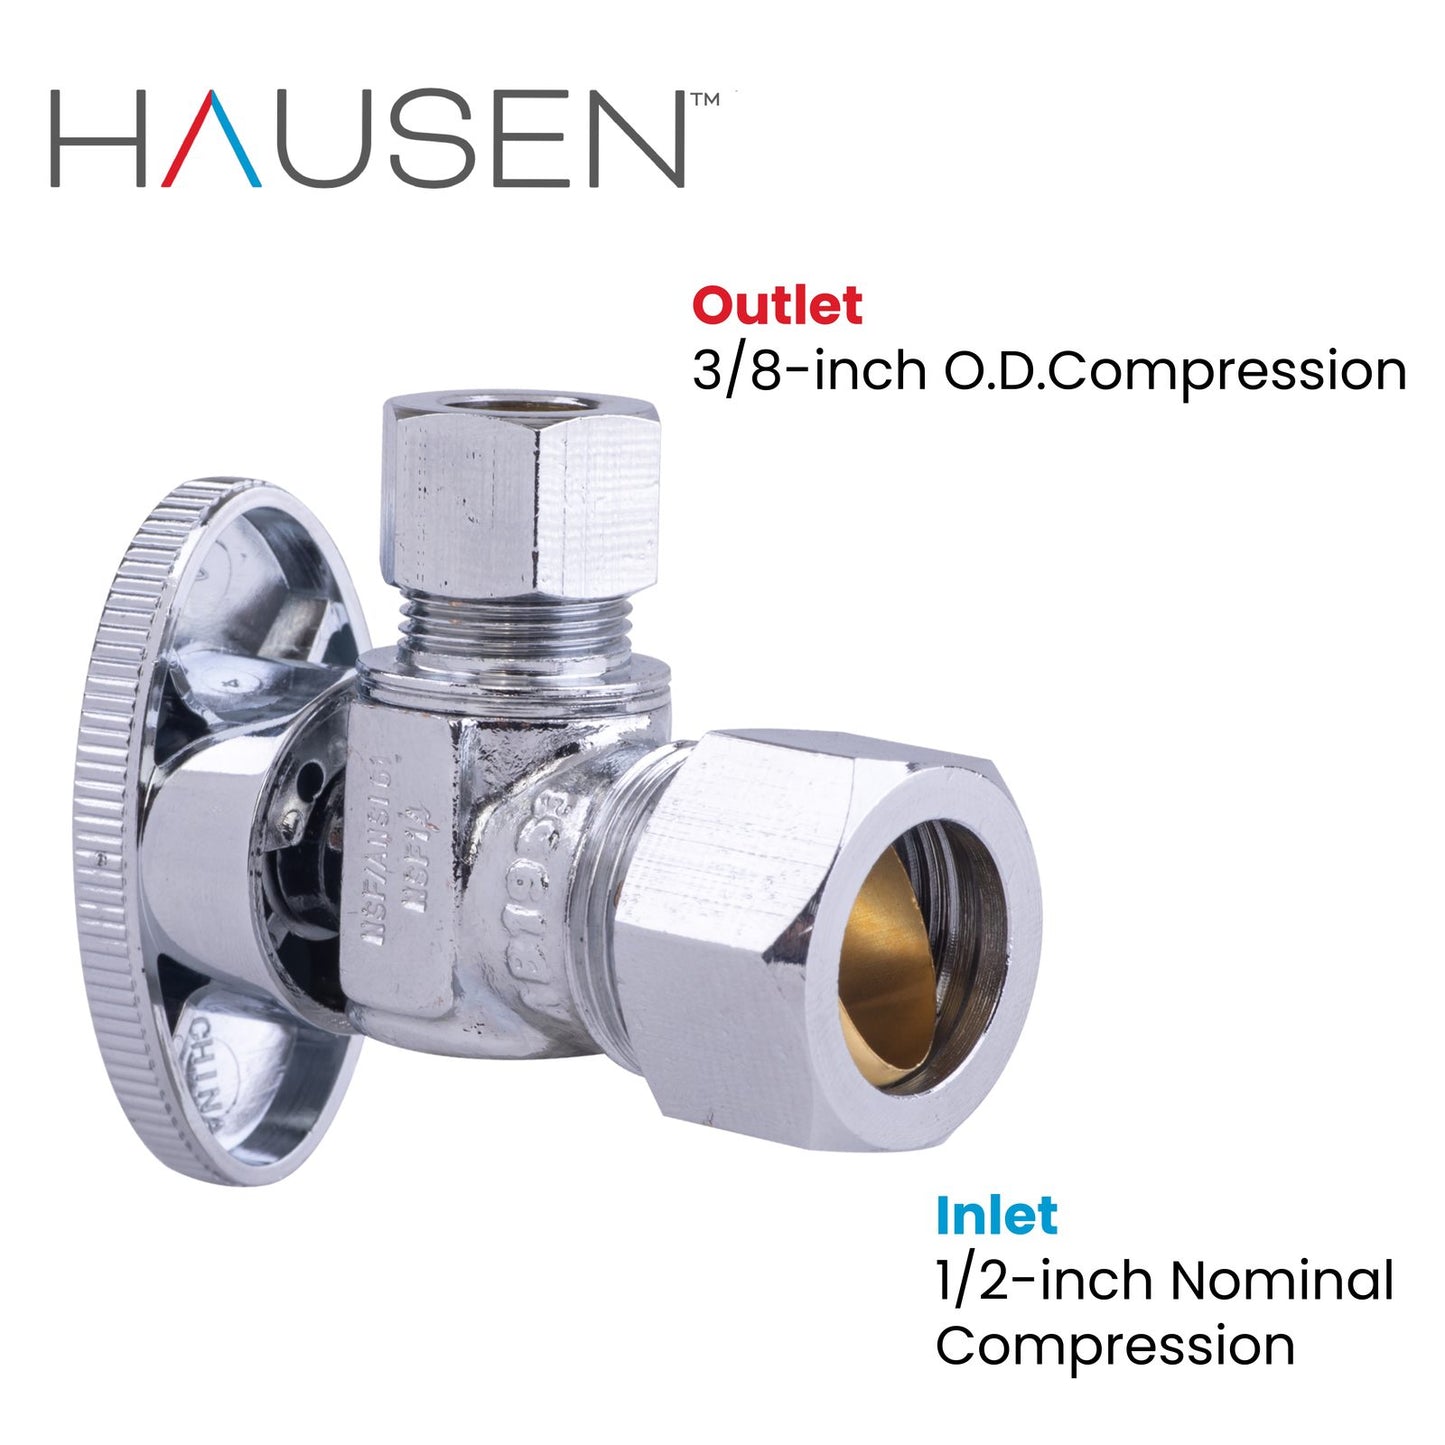 Hausen 1/2-inch Nominal Compression Inlet x 3/8-inch O.D. Compression Outlet 1/4-Turn Angle Water Stop, 1-Pack